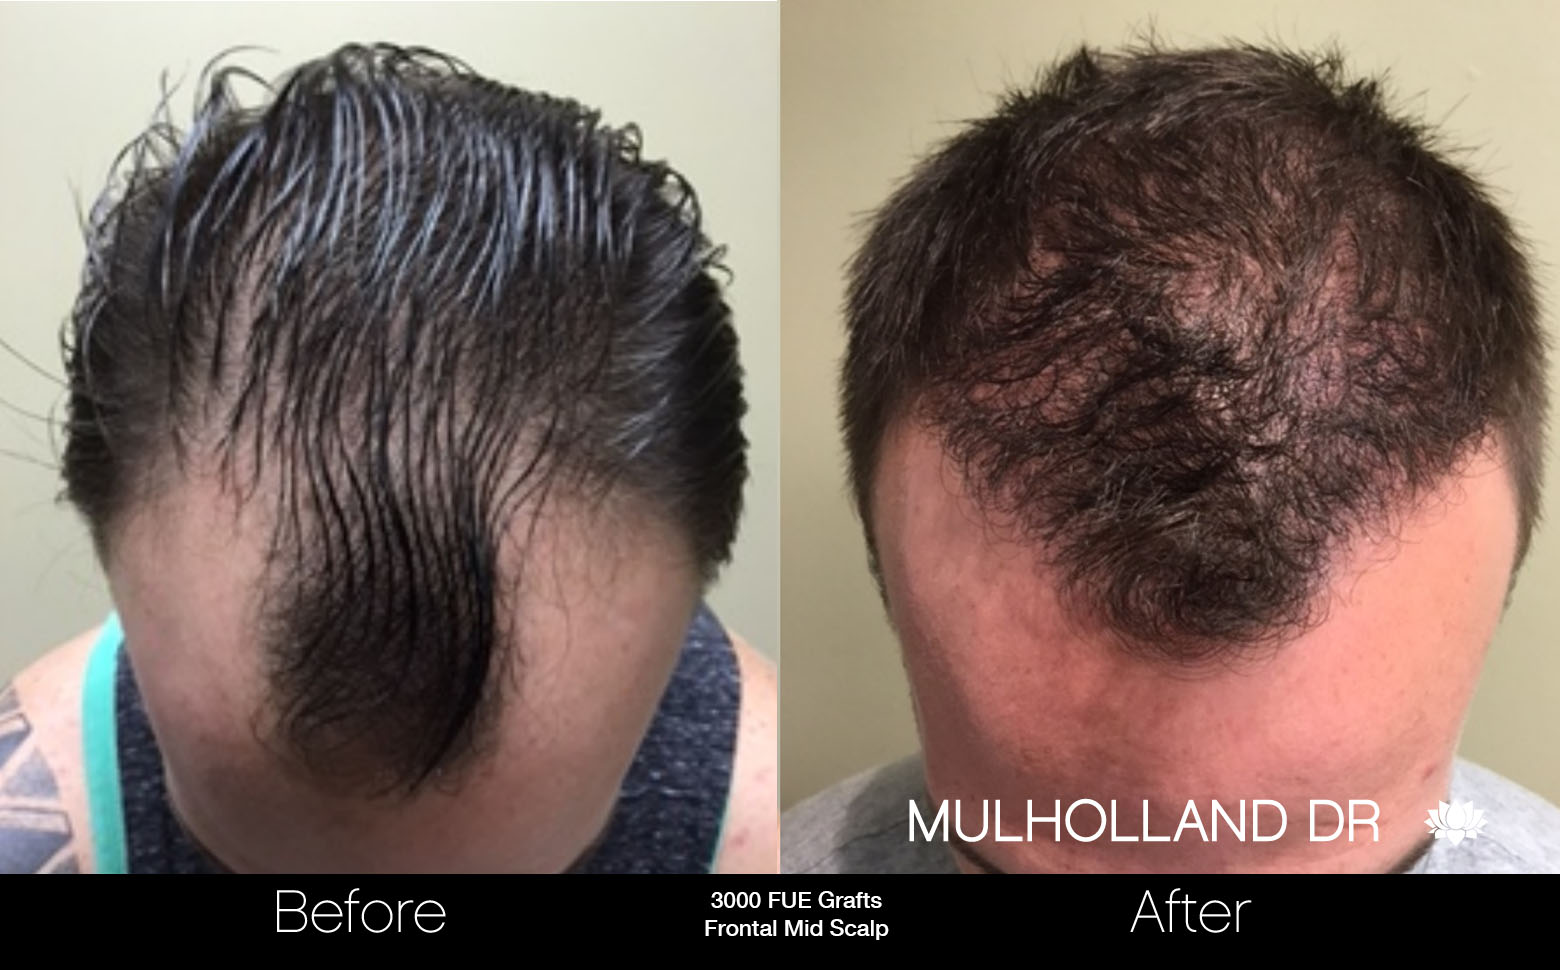 Toronto FUE Hair Transplant Clinic - See Costs & Before/Afters!